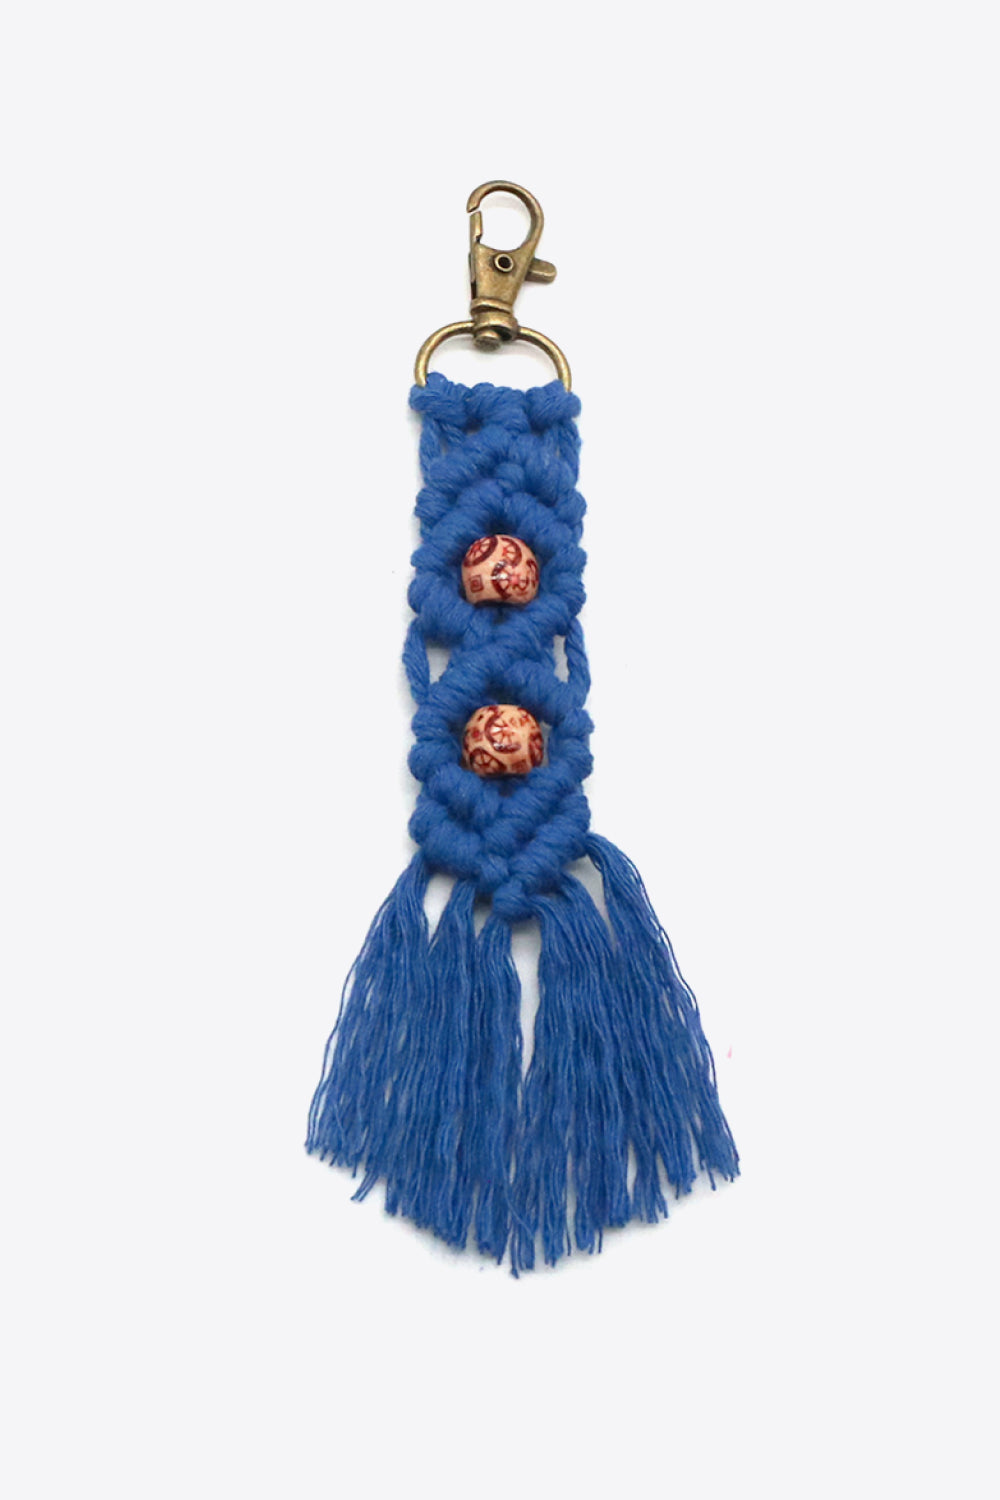 Trendsi Cupid Beauty Supplies Peacock Blue / One Size Keychains Assorted 4-Pack Handmade Macrame Fringe Keychain